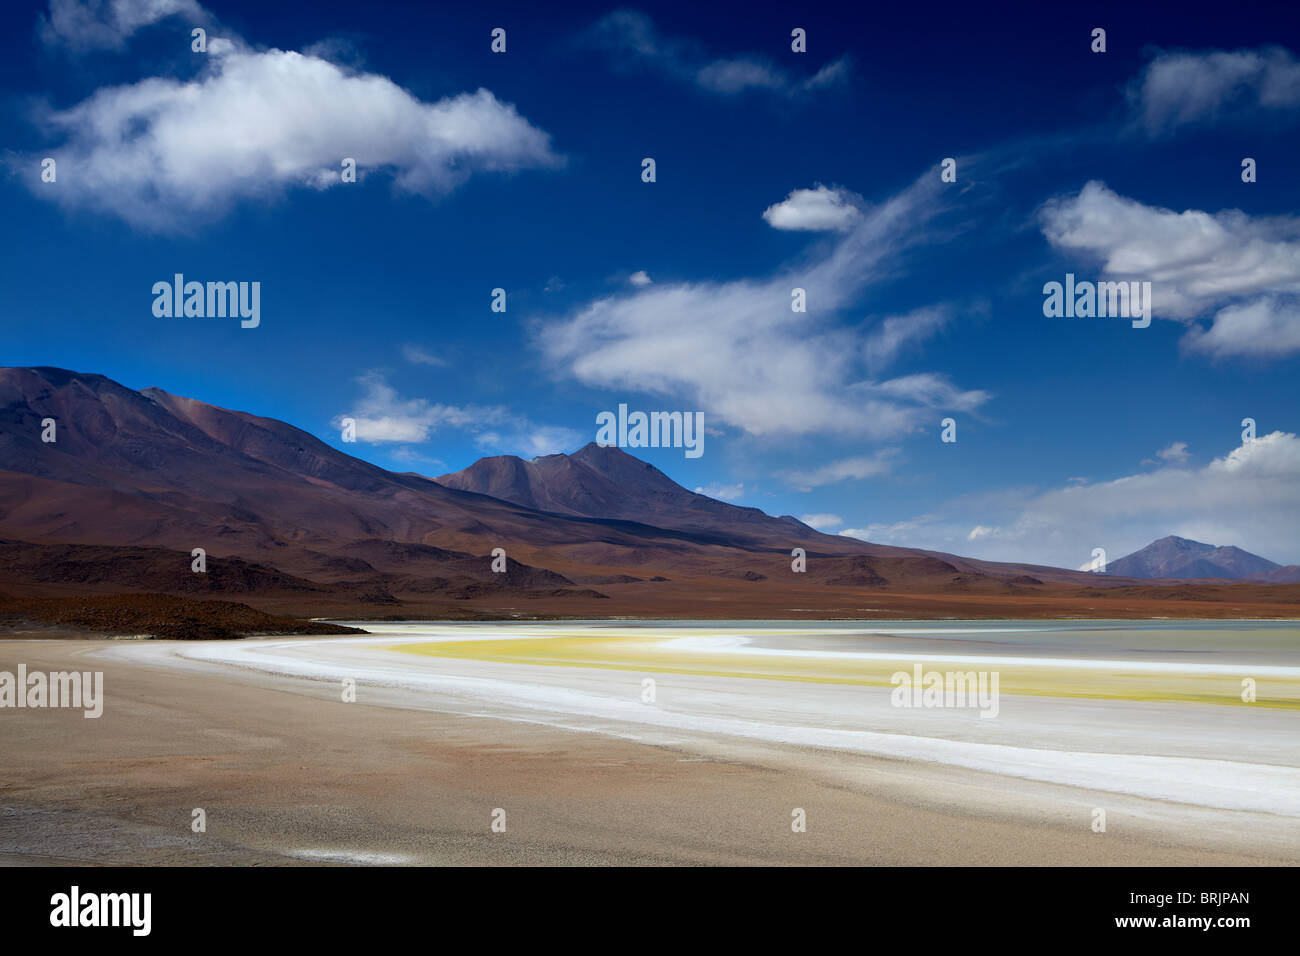 the remote region of high desert, altiplano and volcanoes near Tapaquilcha, Bolivia Stock Photo